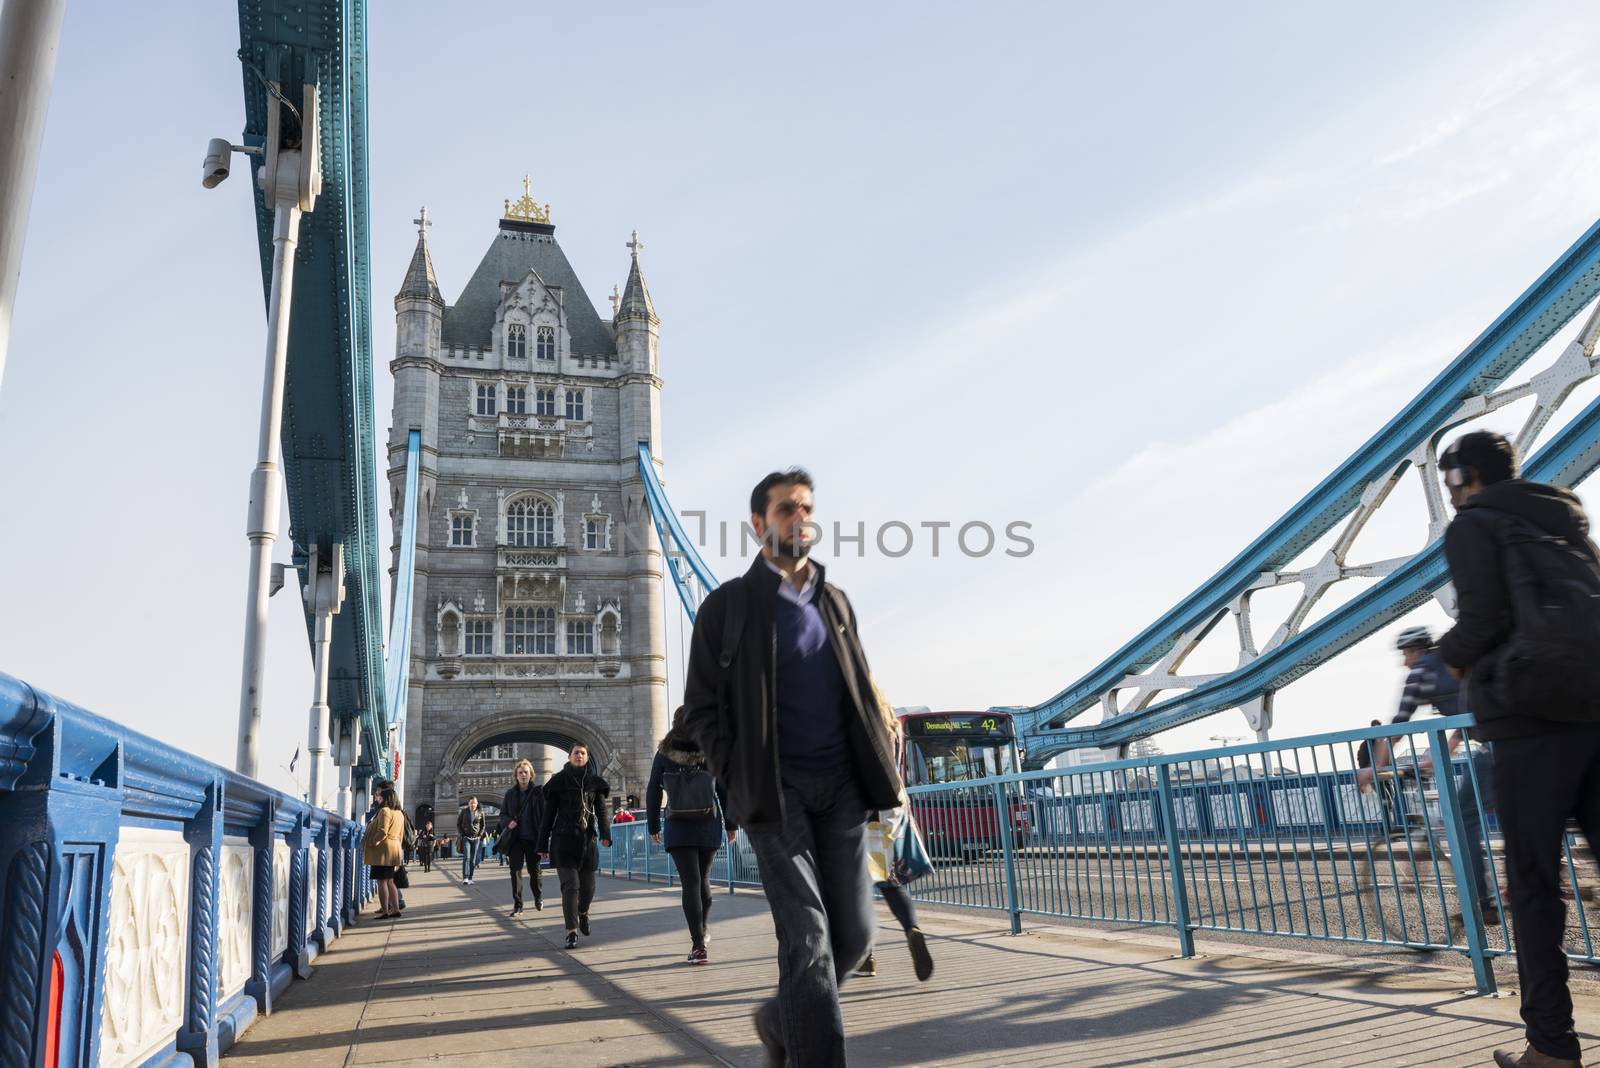 LONDON, UK – APRIL 01 2016: Commuters crossing Tower Bridge during rush hour. Tower Bridge links the South of River Thames to the City area.